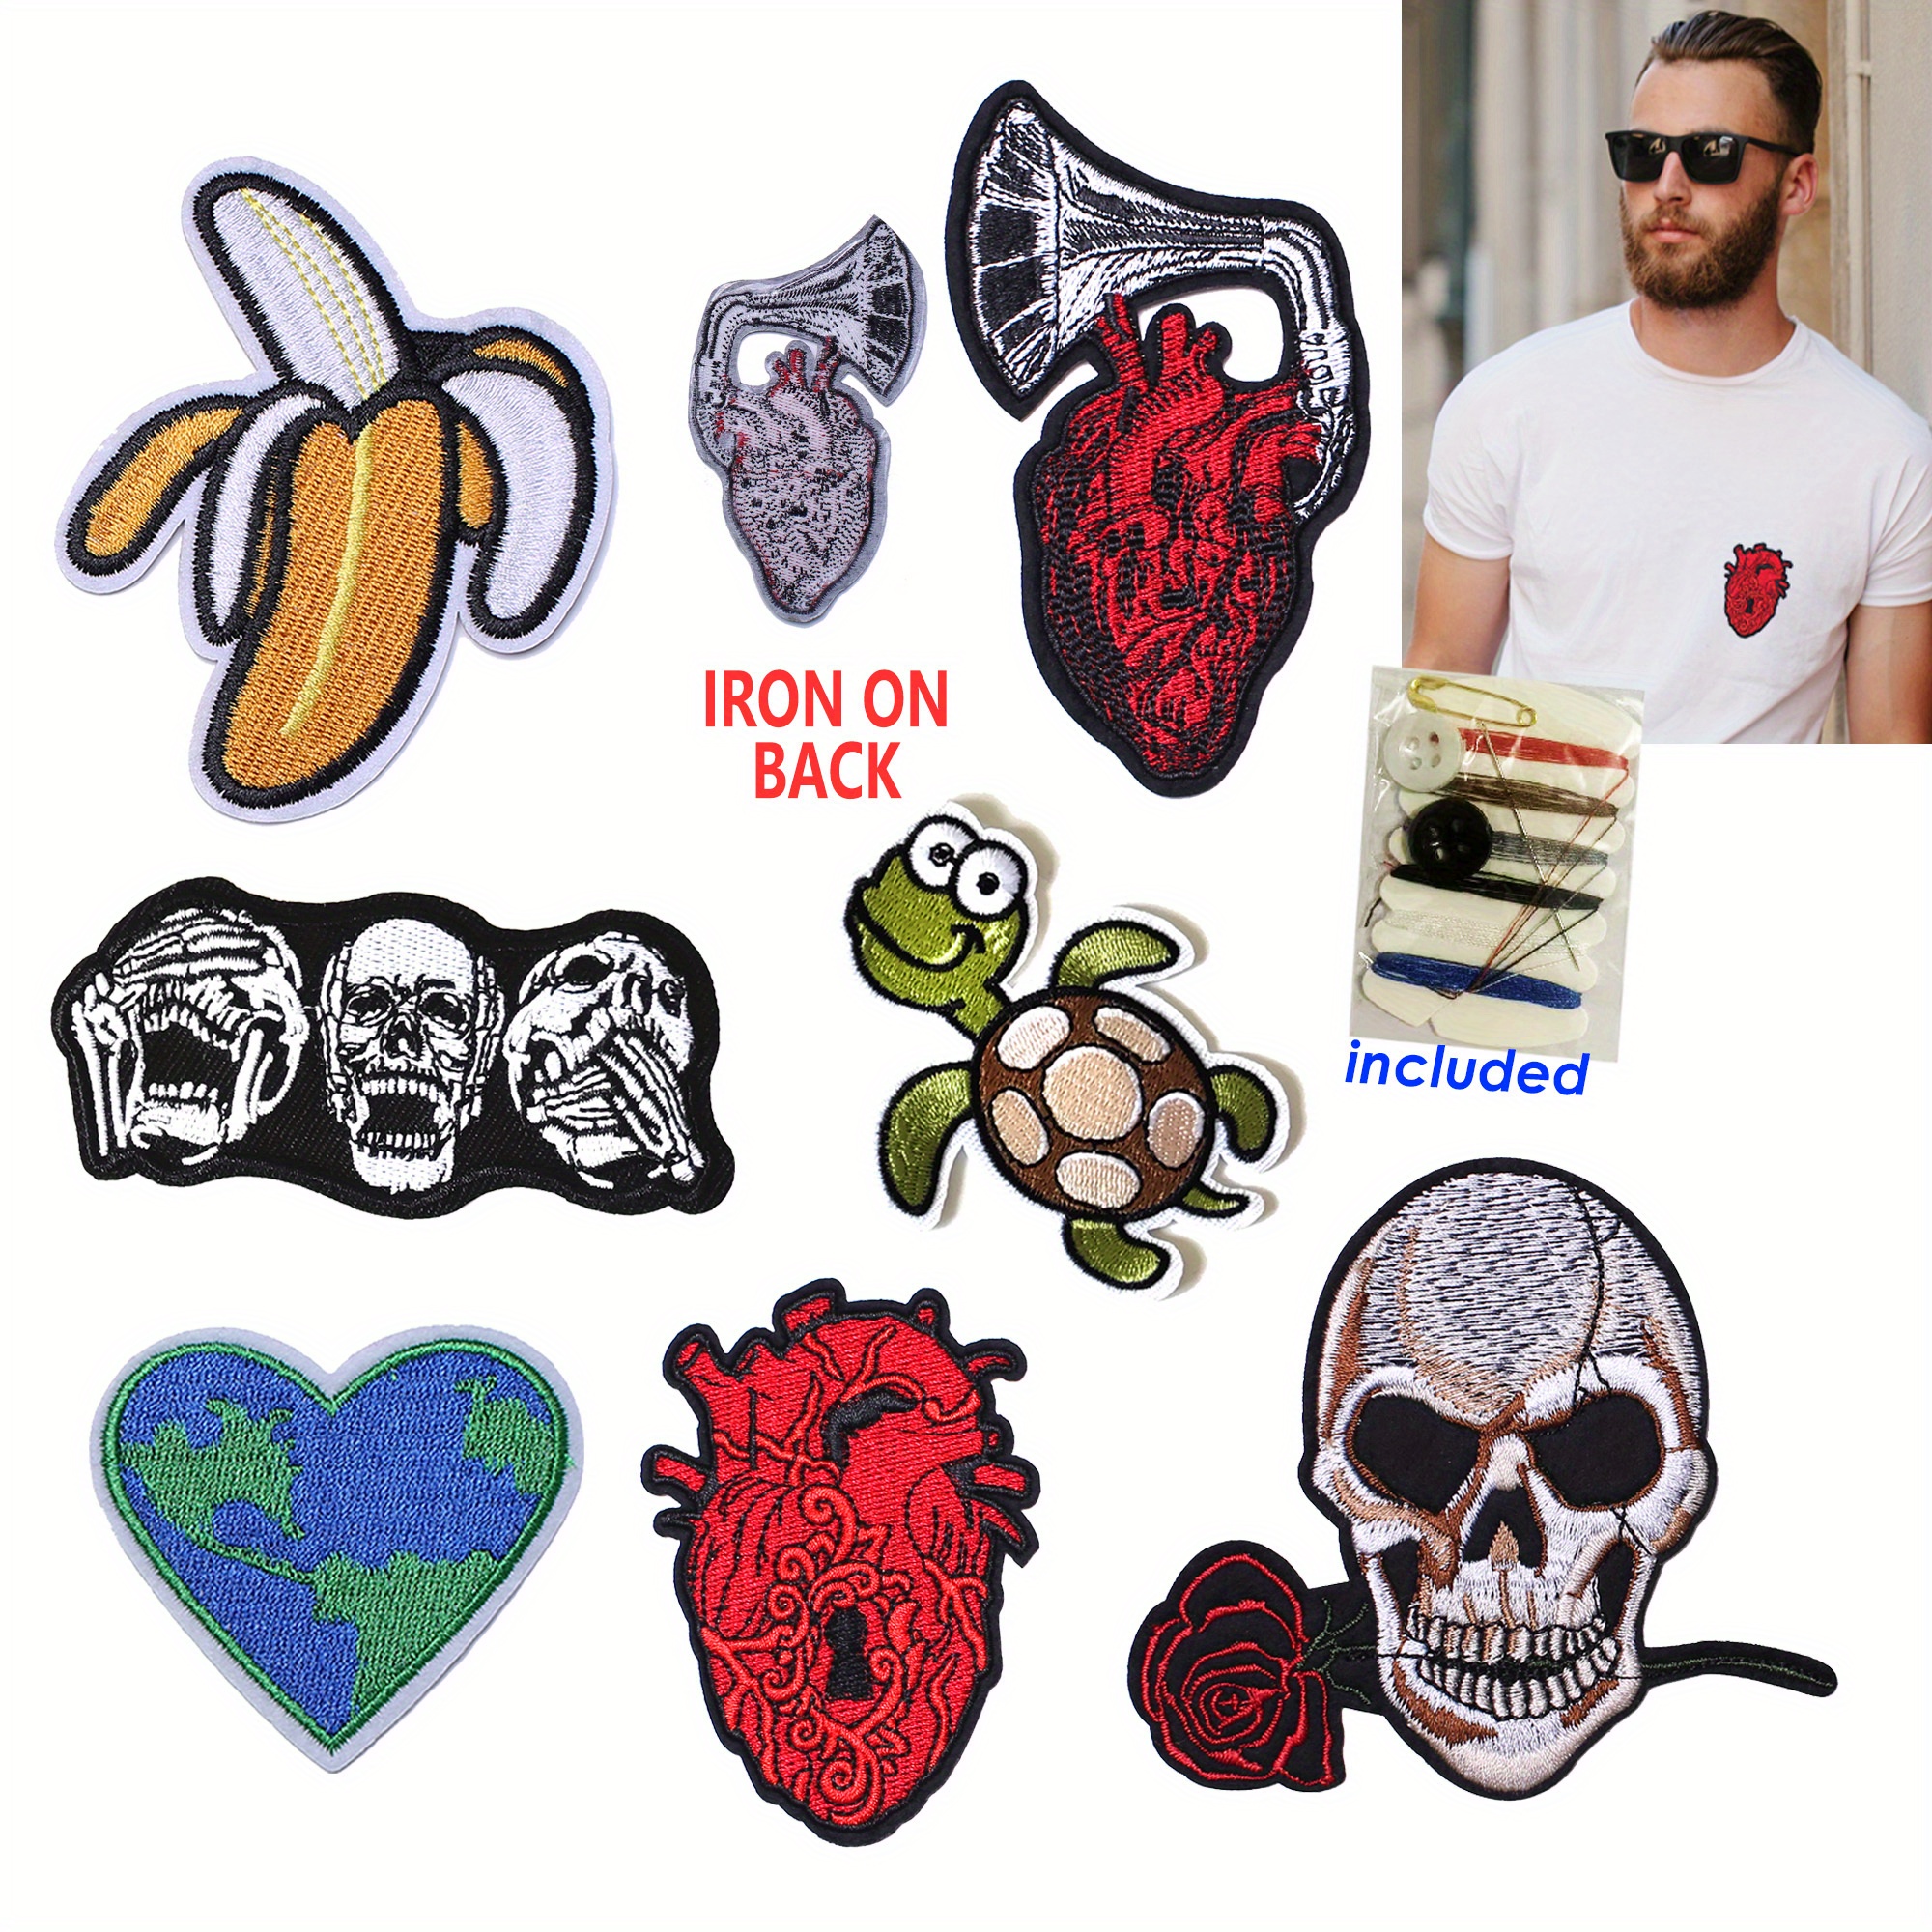 5pcs/lot Iron Patches For Jackets Iron Patches For Clothing Patch